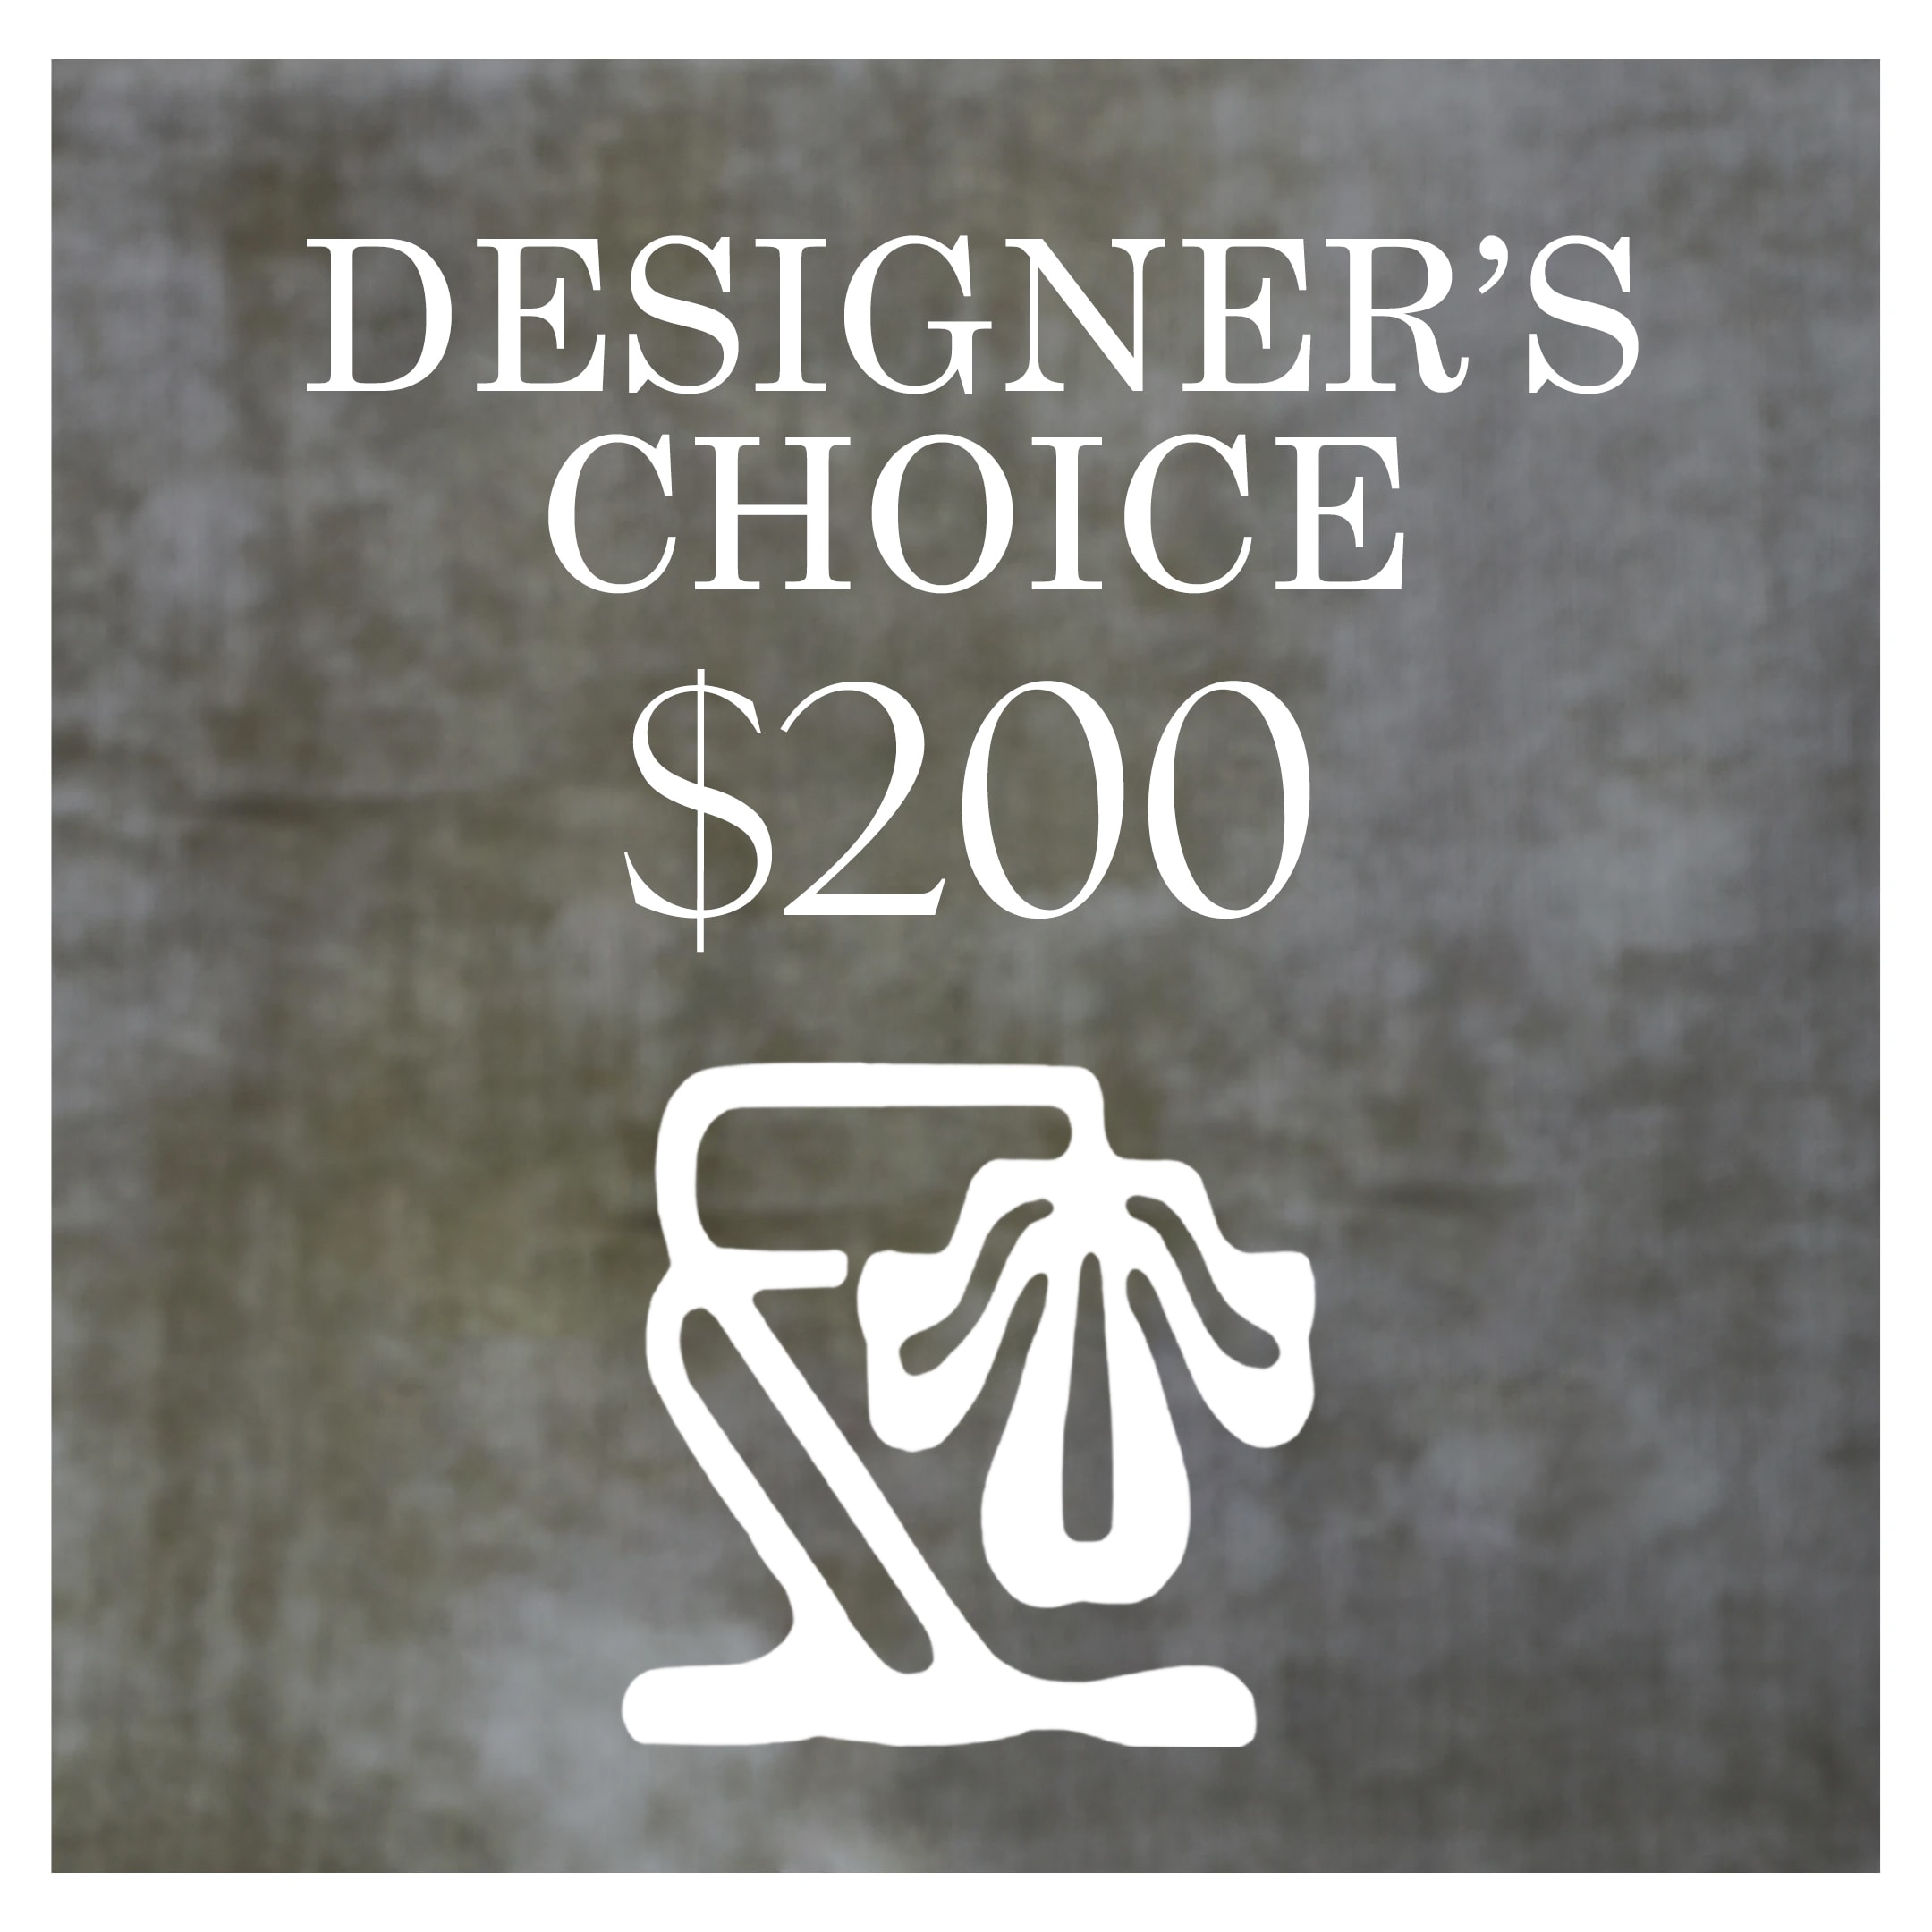 $200 - Designer’s Choice  - We will design a beautiful arrangement. Please note any preferences such as: tall vs. short, colorful vs. neutral, and specific flowers or colors. 